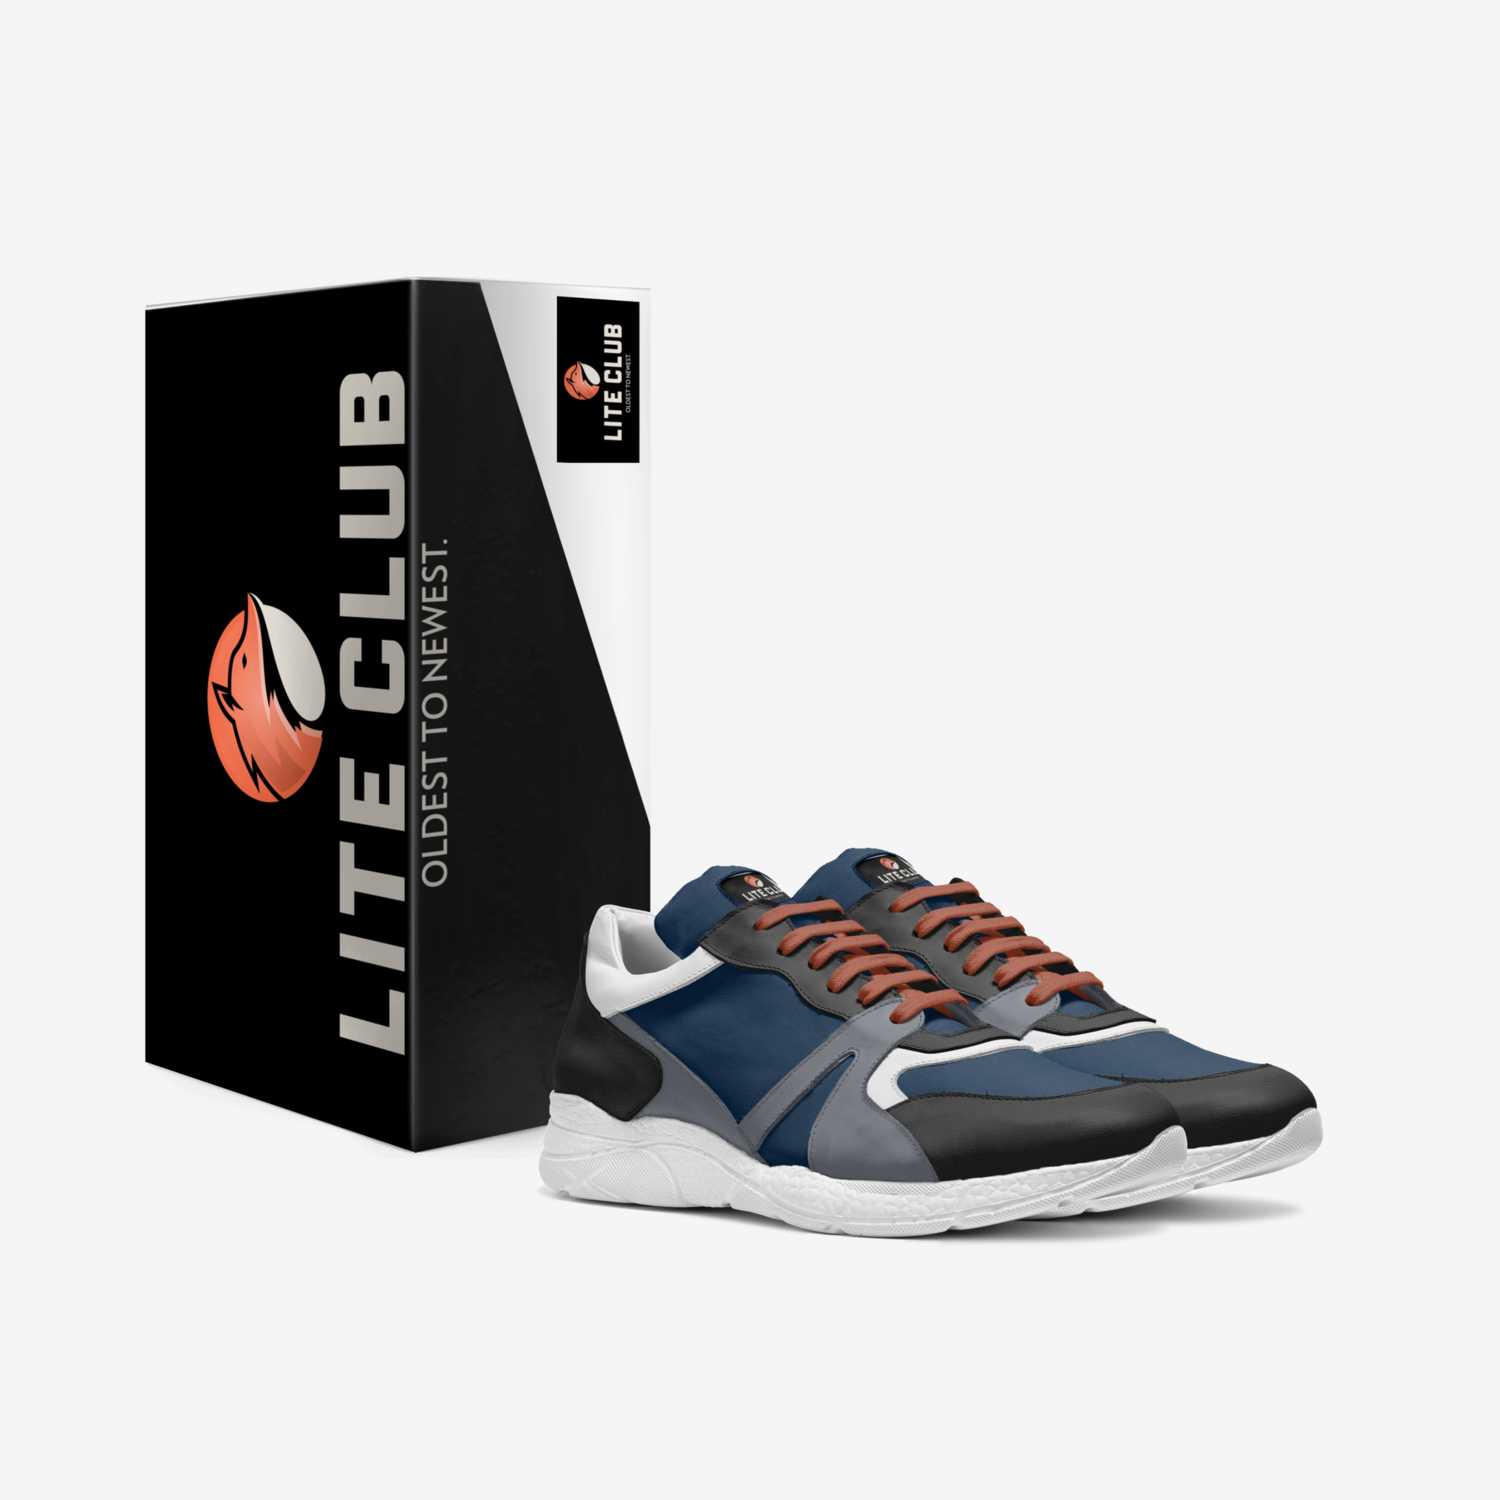 Lite club custom made in Italy shoes by Matthew Gibson | Box view